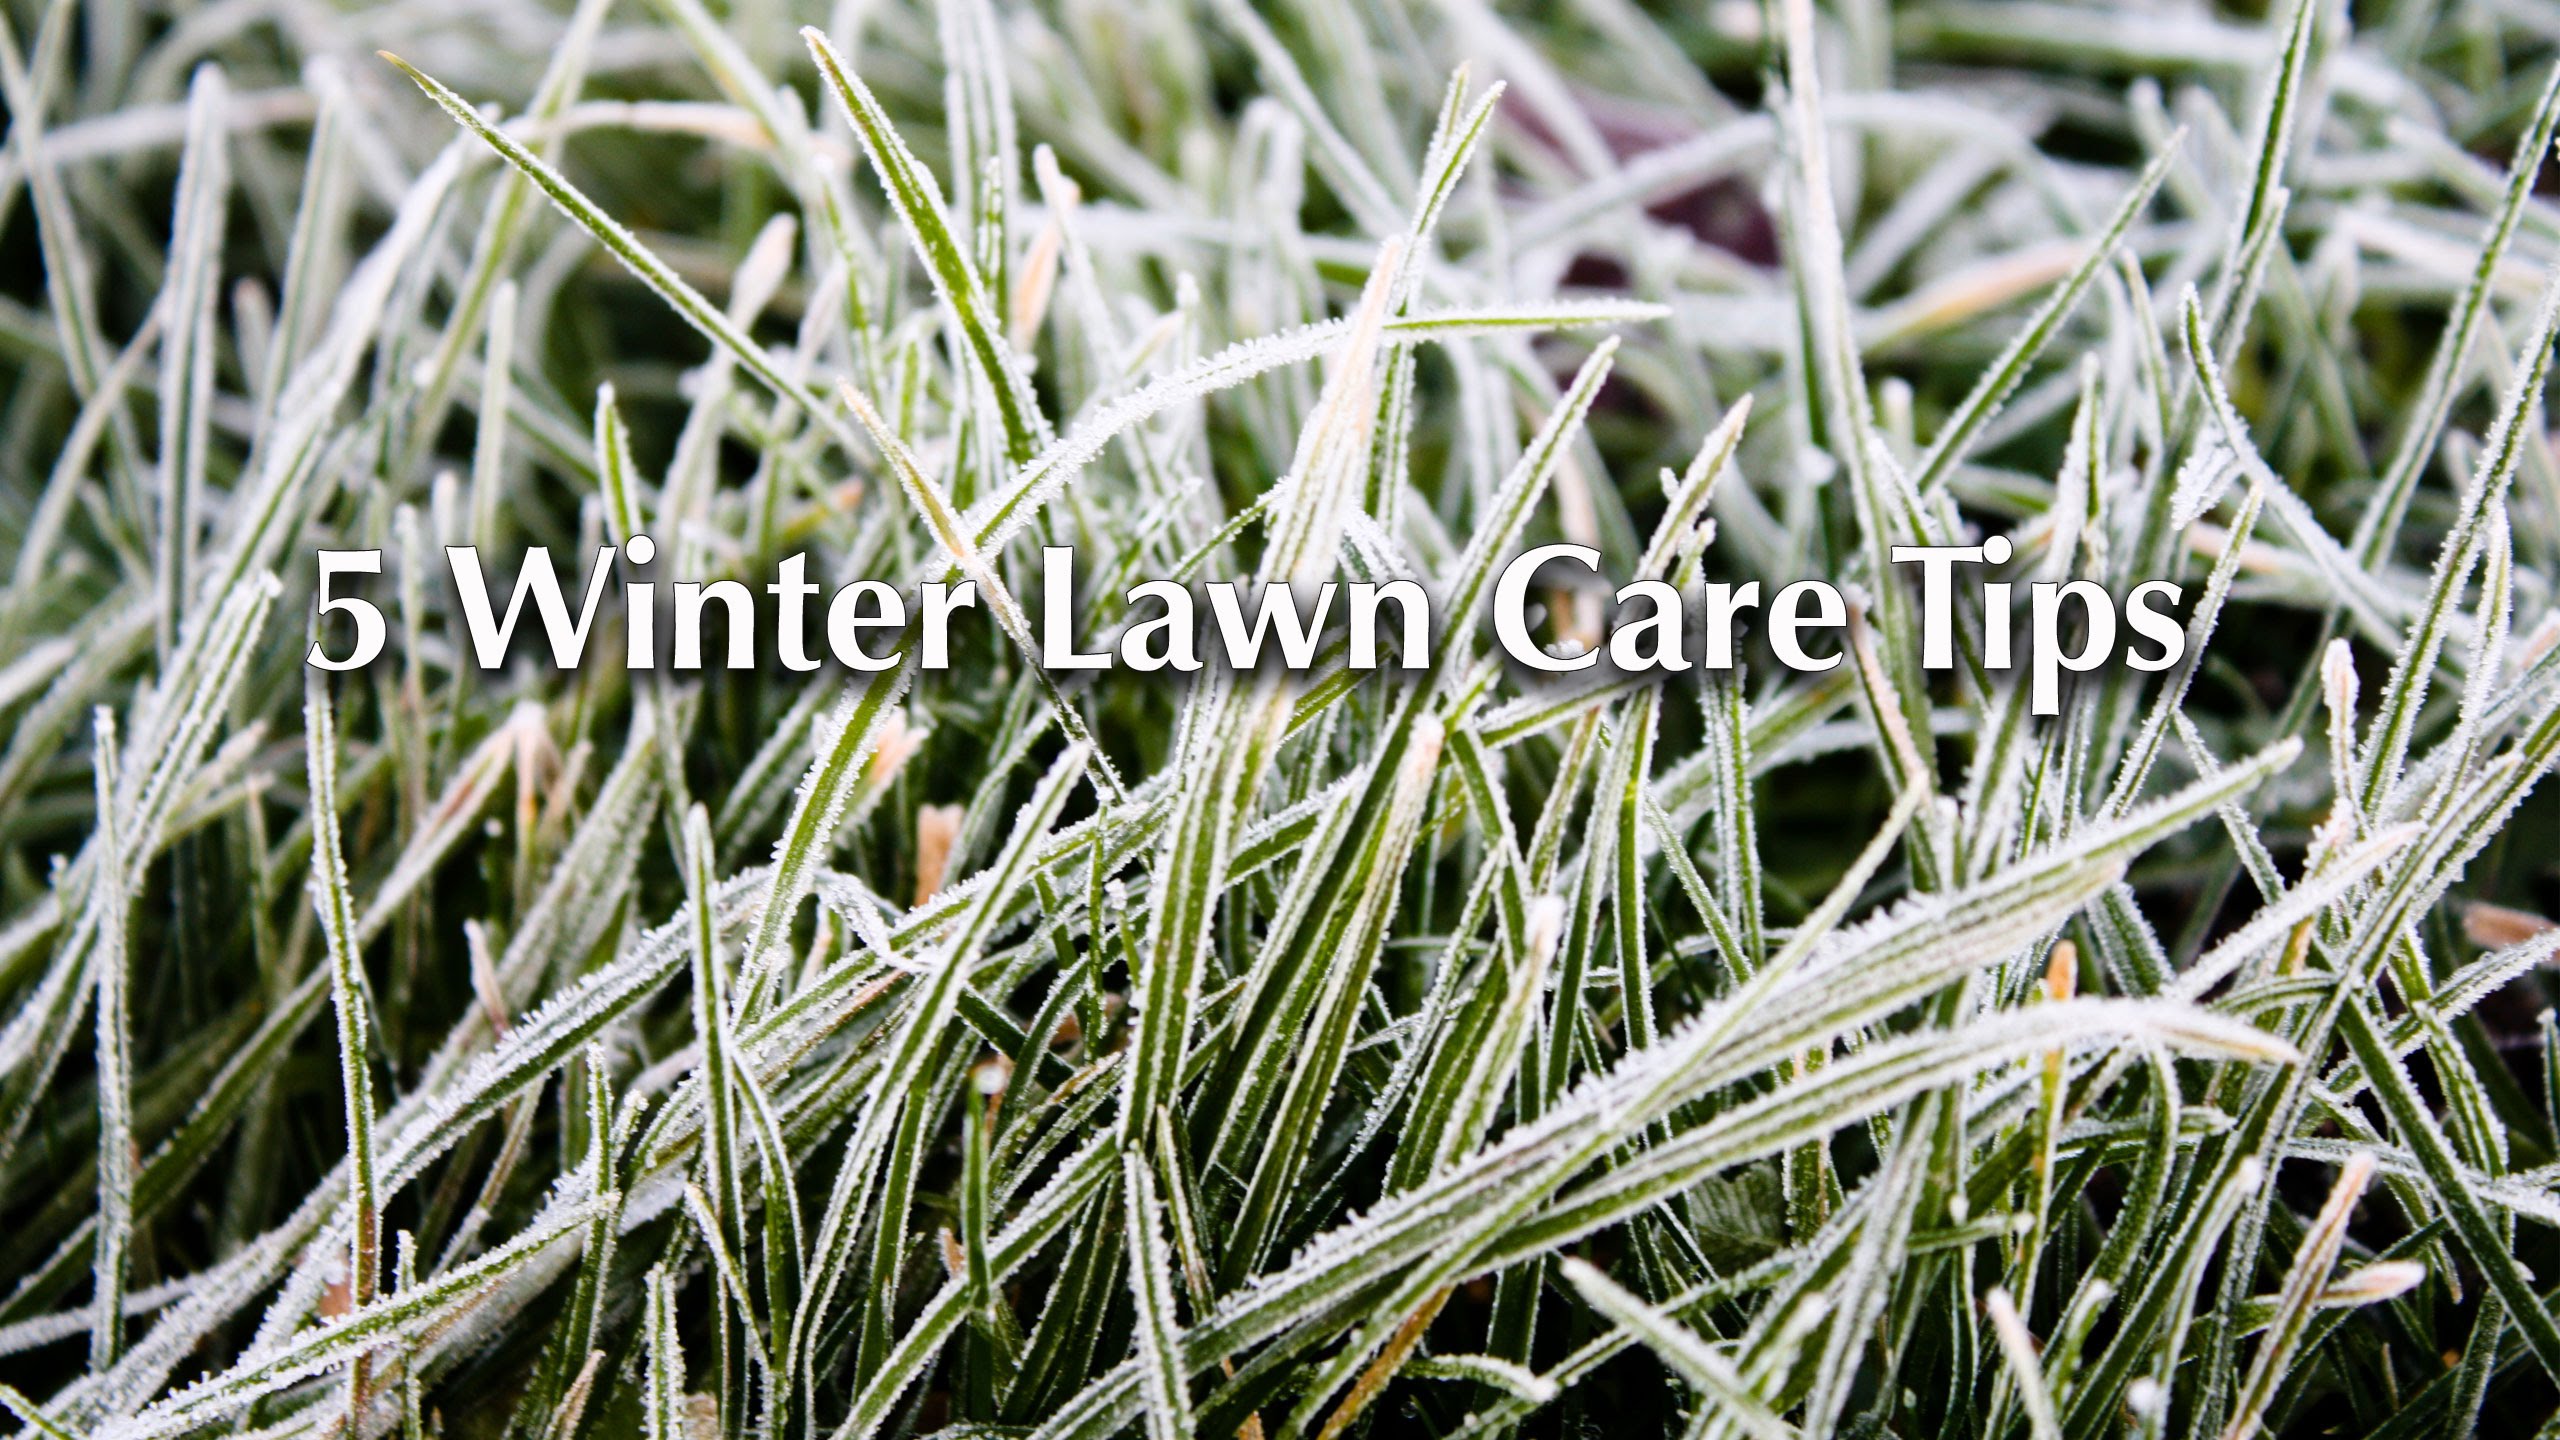 5 Winter Lawn Care Tips - YouTube